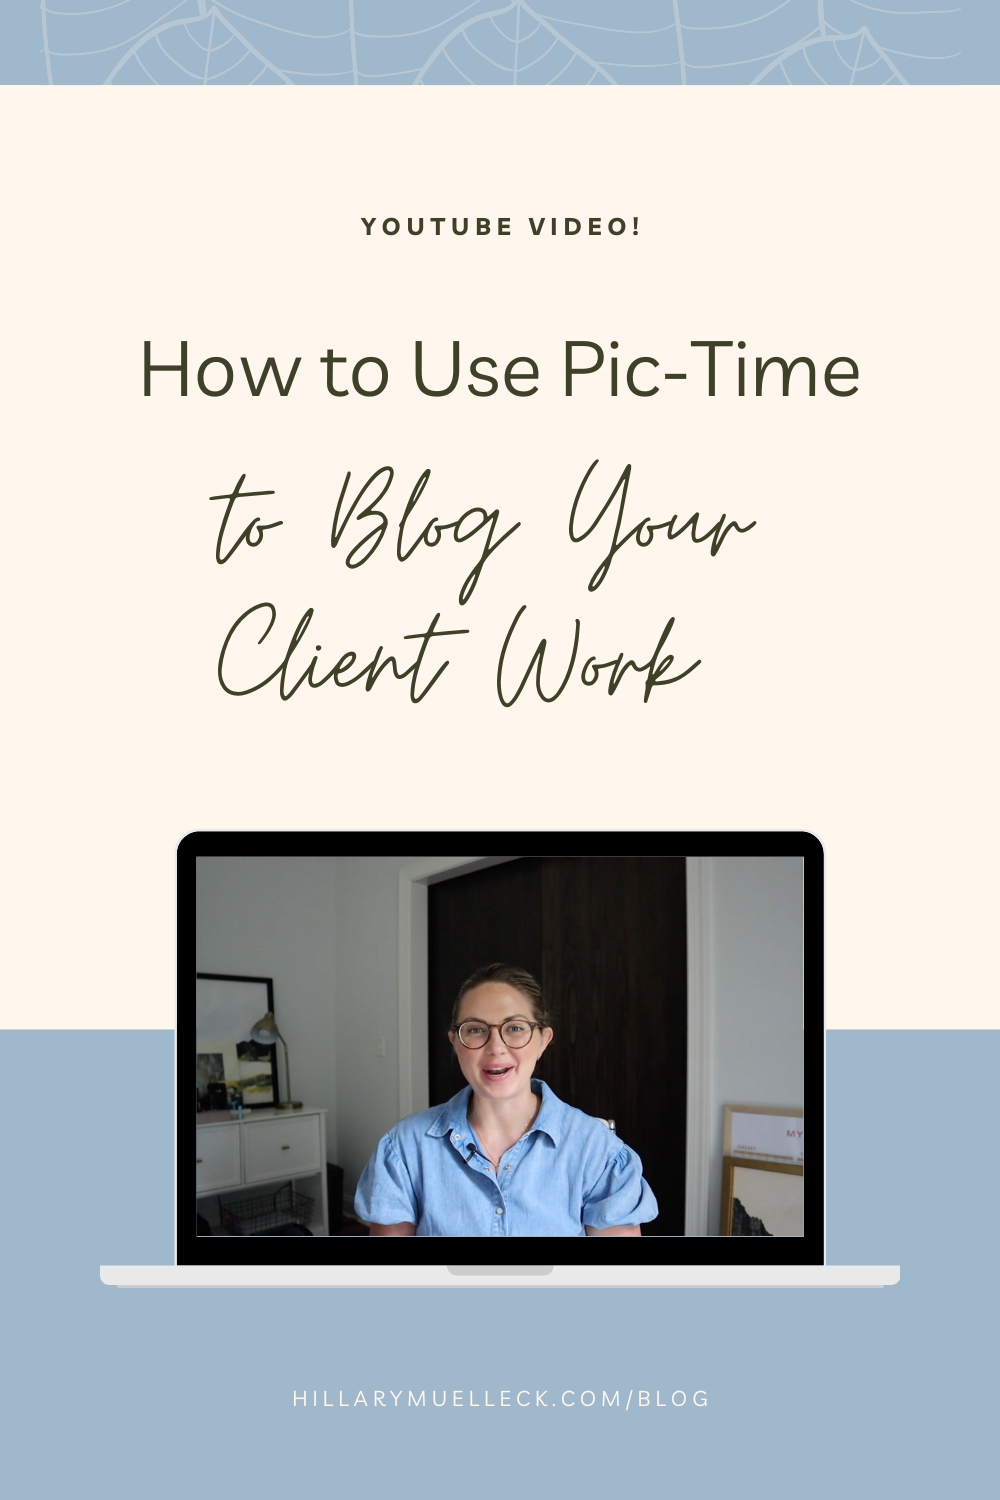 Wedding photographer and educator Hillary Muelleck shares a tutorial on how to use Pic-Time to blog for your photo business